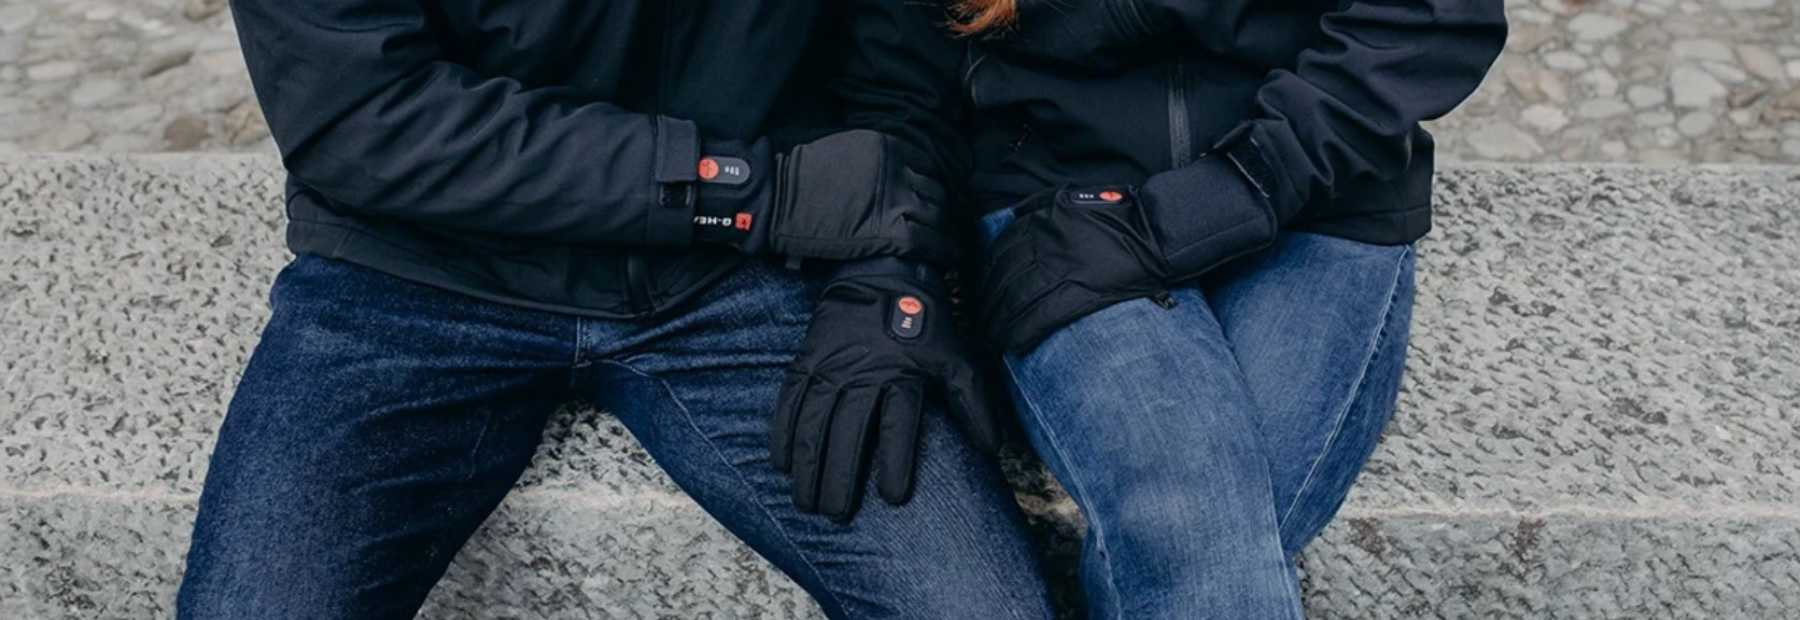 Discover our large collection of heated gloves - G-Heat®.